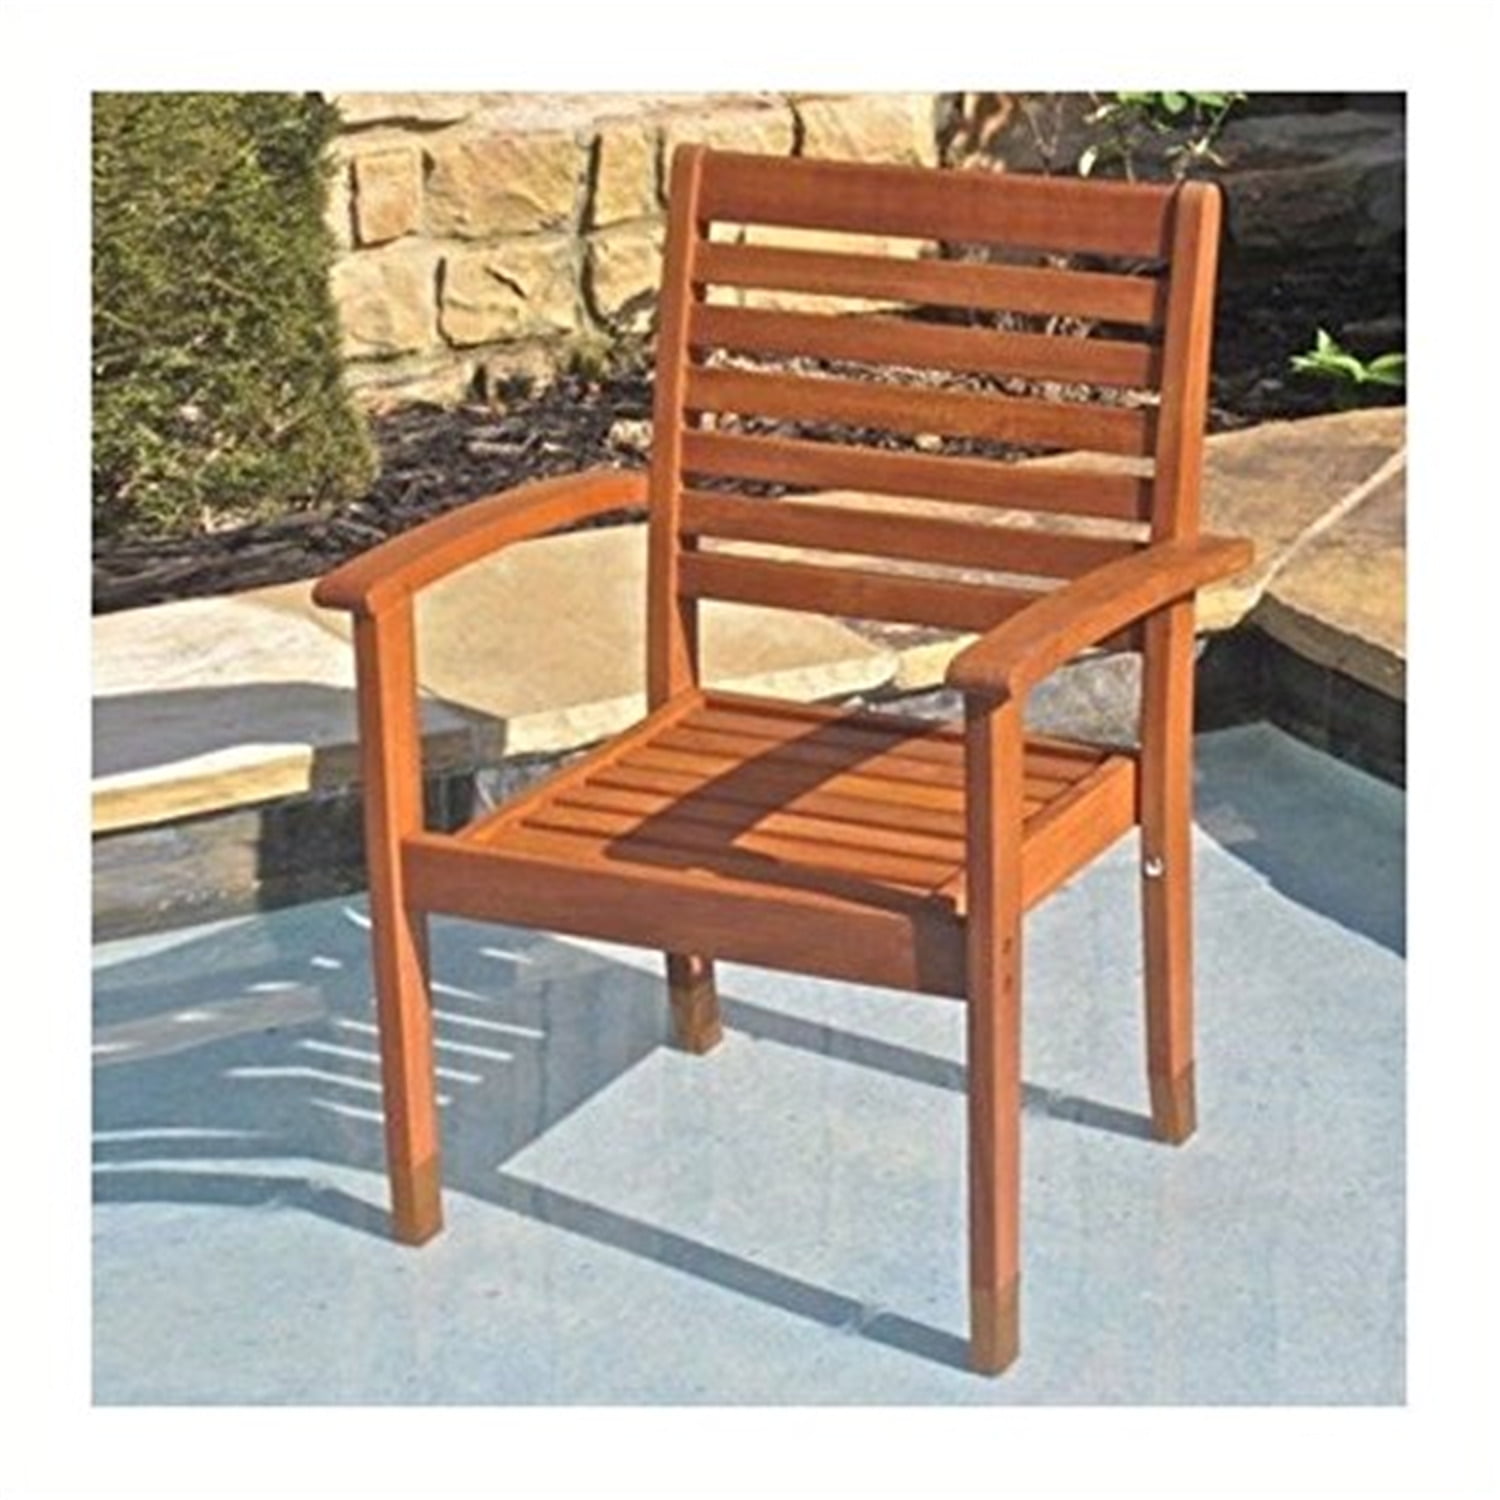 International Caravan Royal Tahiti Oslo Outdoor Contemporary Chairs-Color:Brown Stain,Material:Balau Wood,Number of Items:Set Of 2